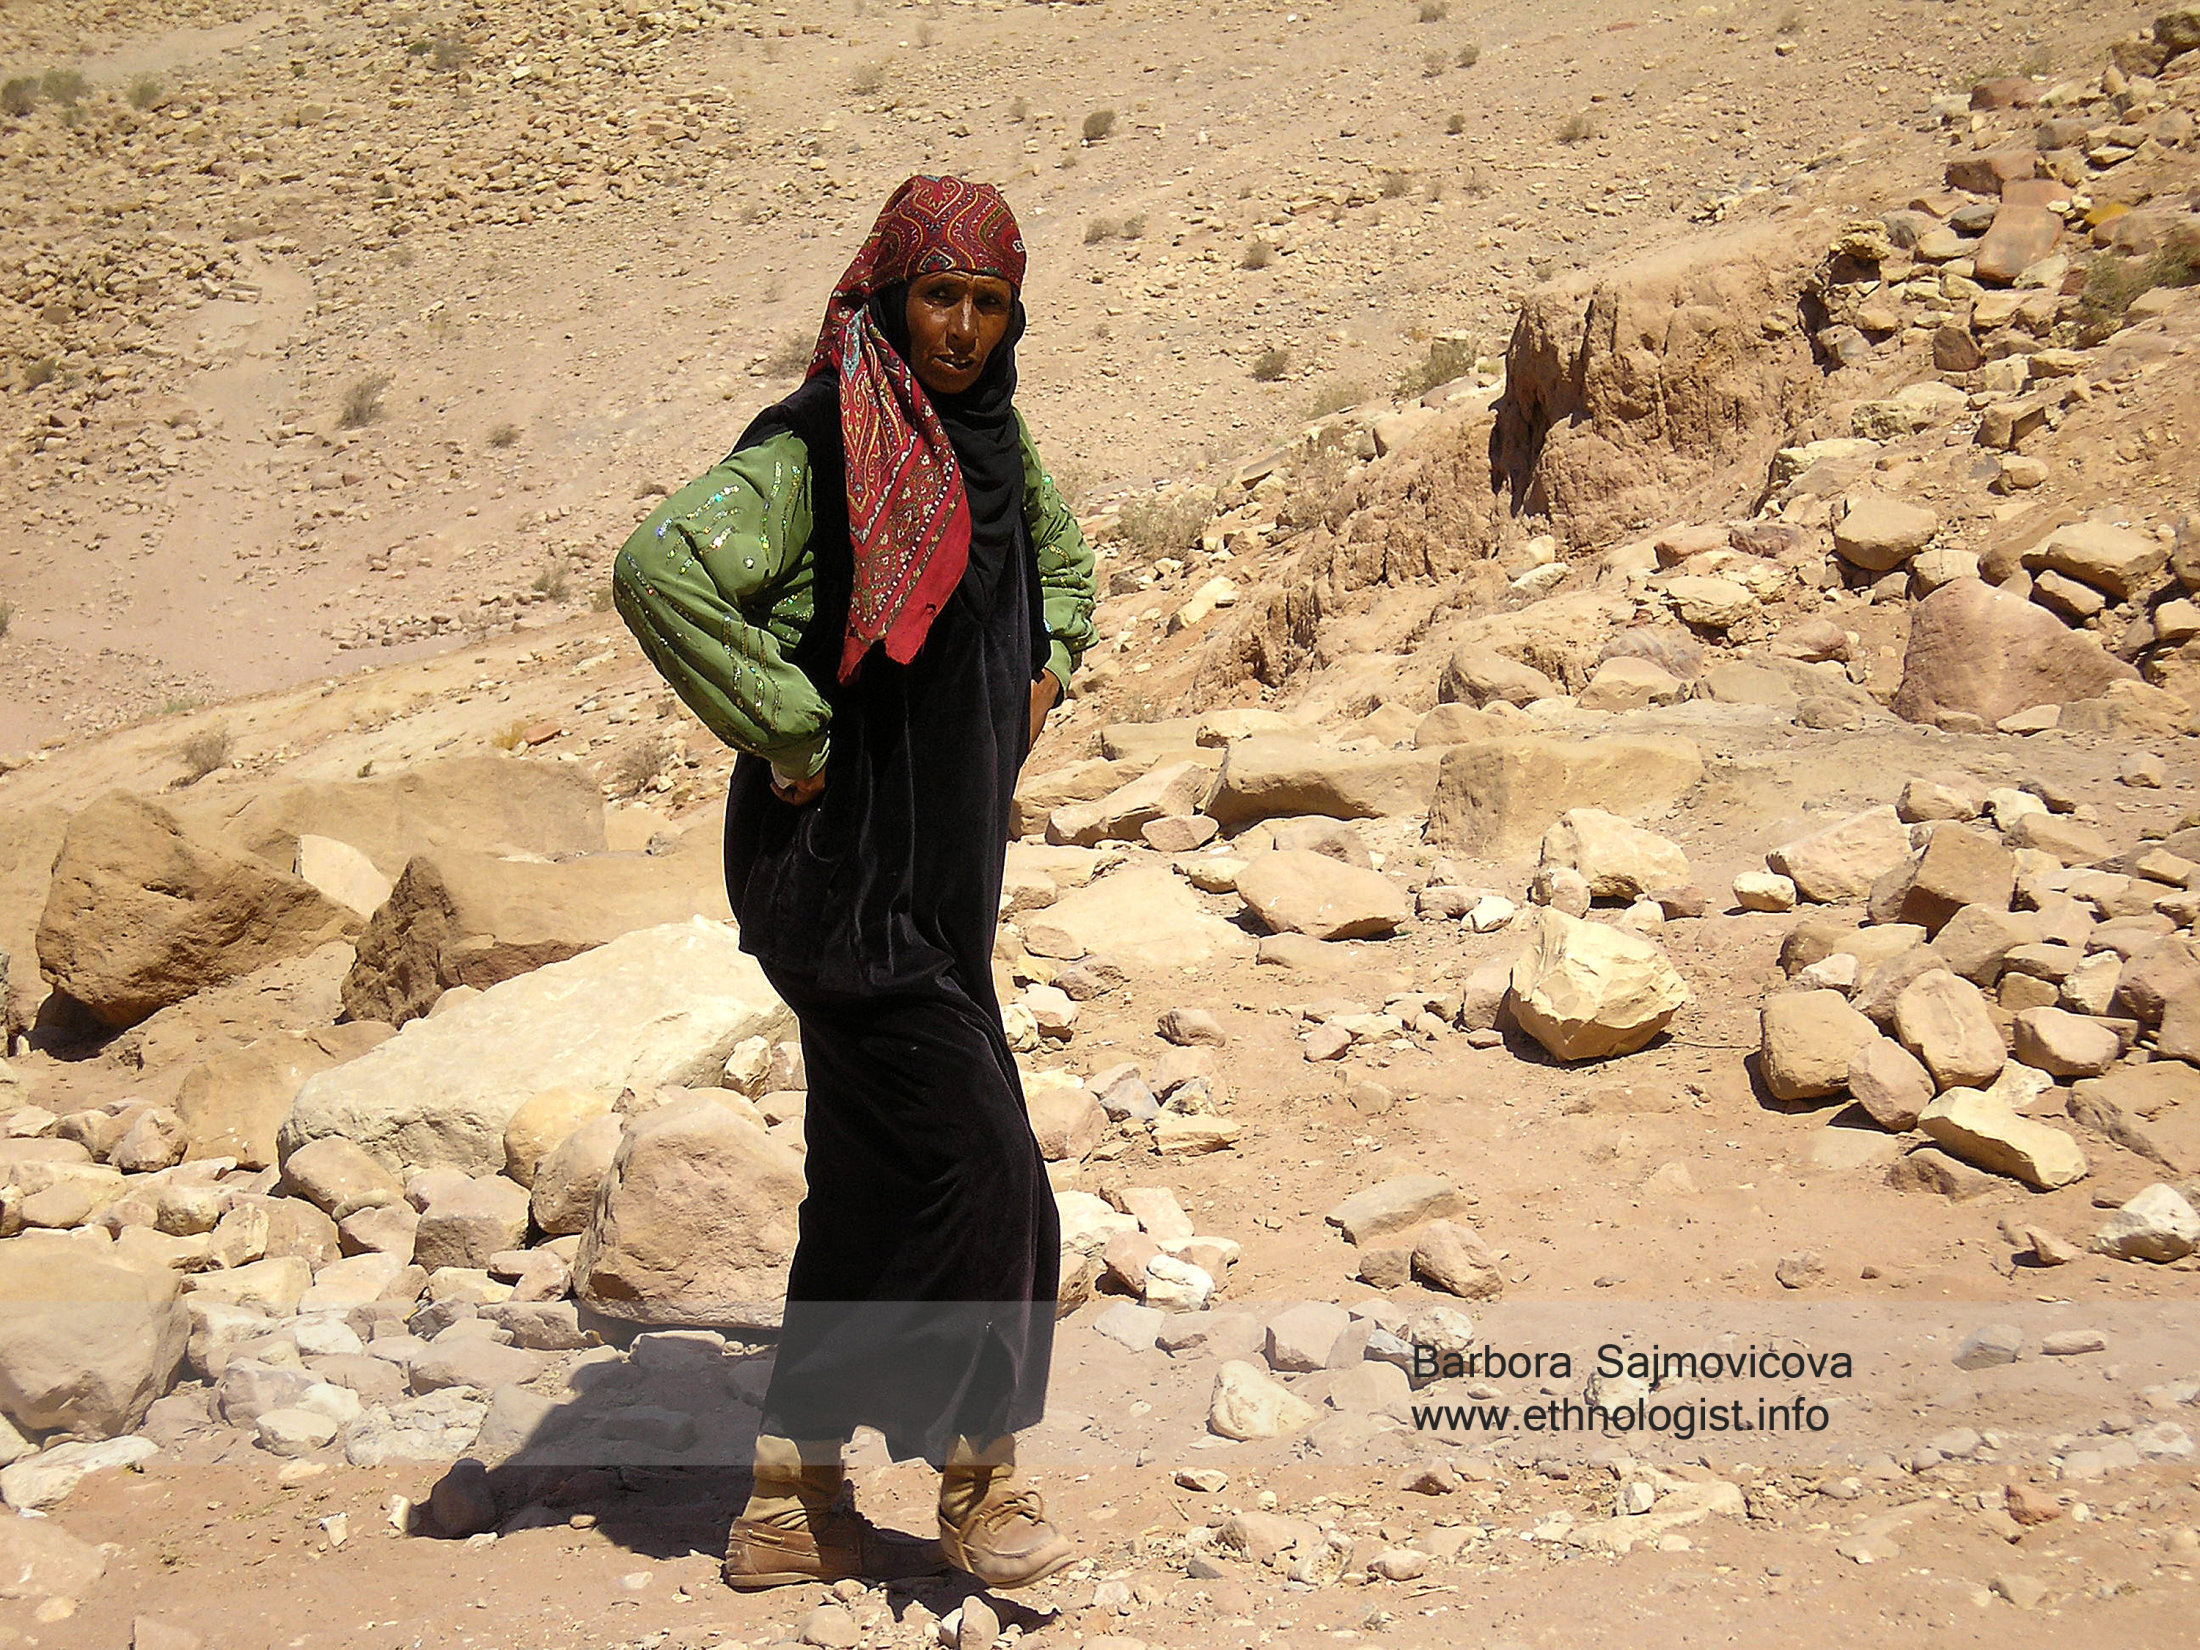 The Bedouin woman in Petra